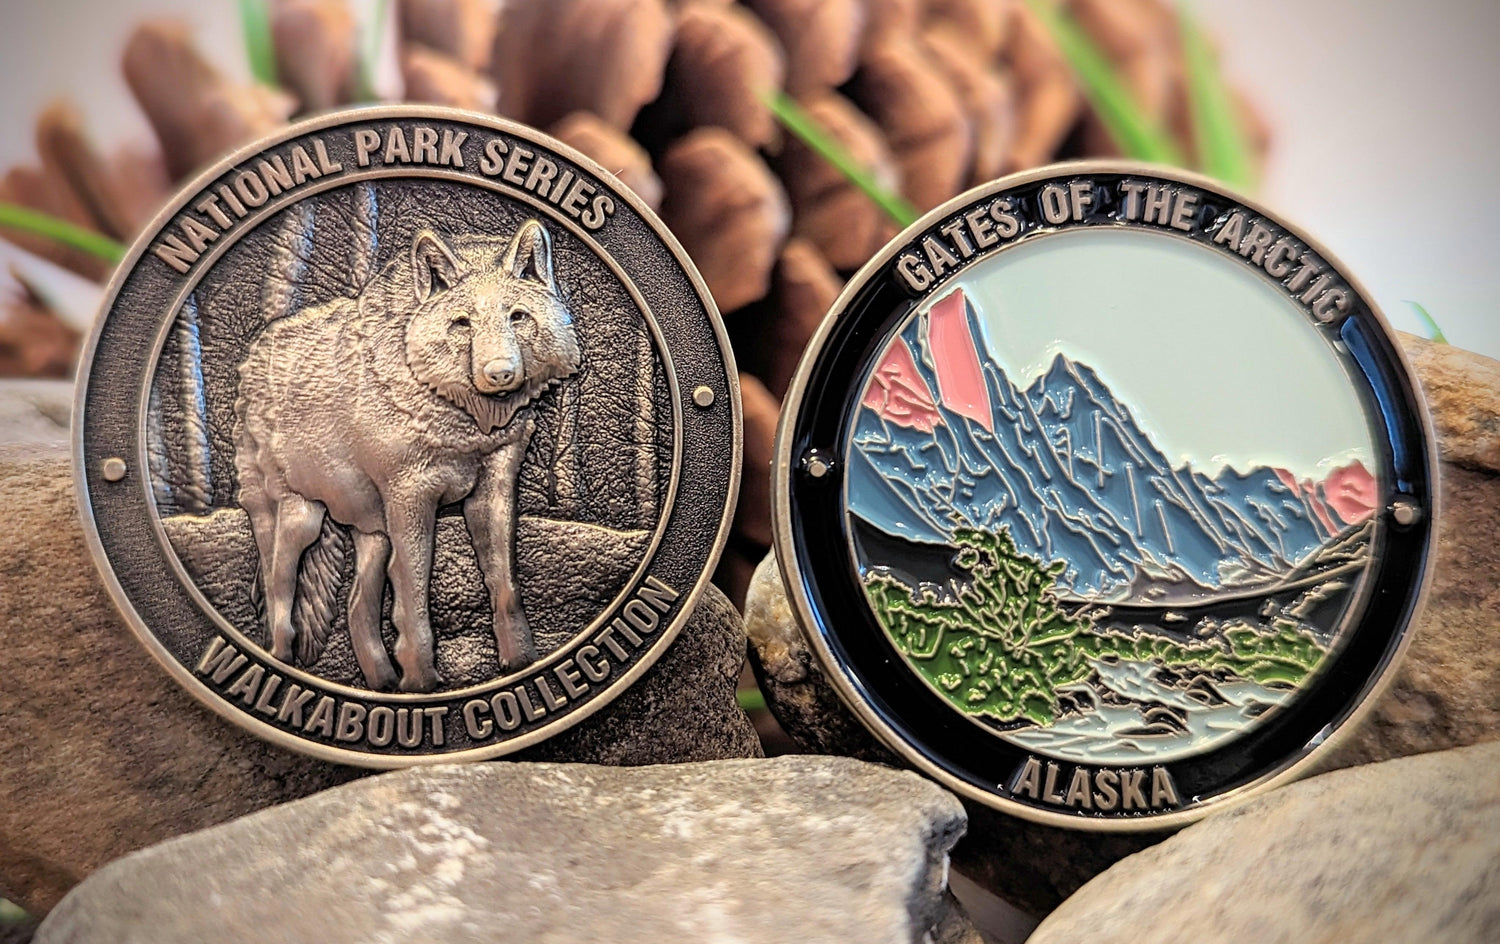 GATES OF THE ARCTIC NATIONAL PARK CHALLENGE COIN